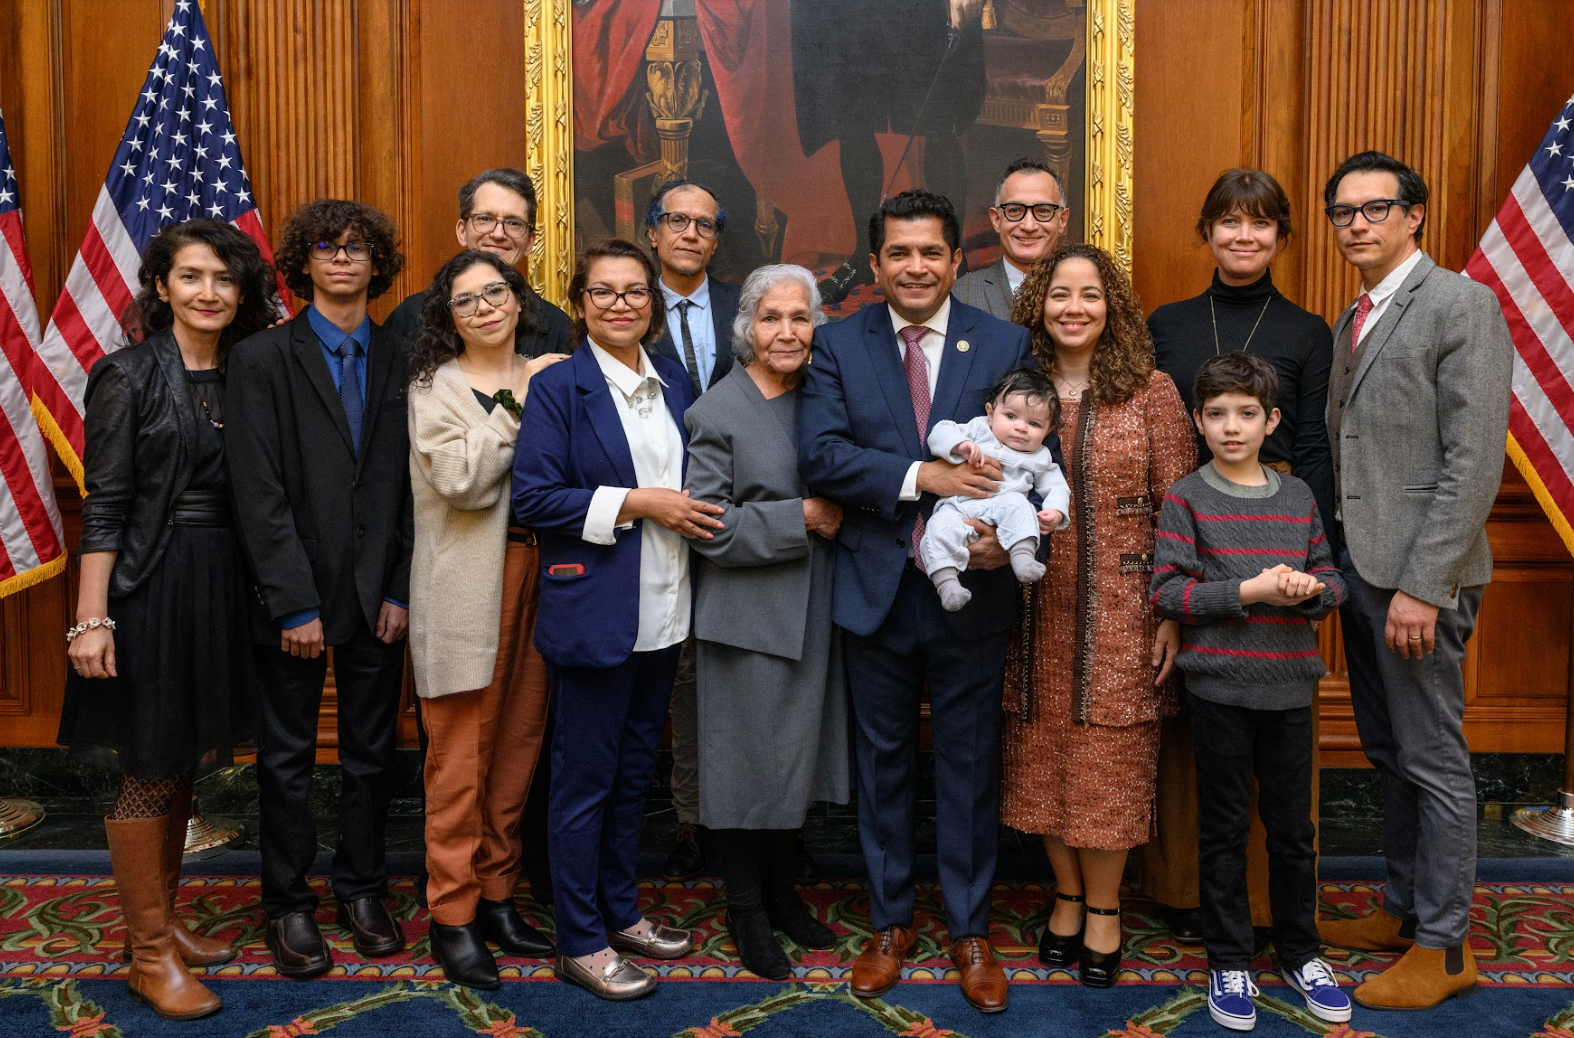 Rep. Gomez's Son, Hodge, Is a New Congressional Star, Inheritor of American Dream